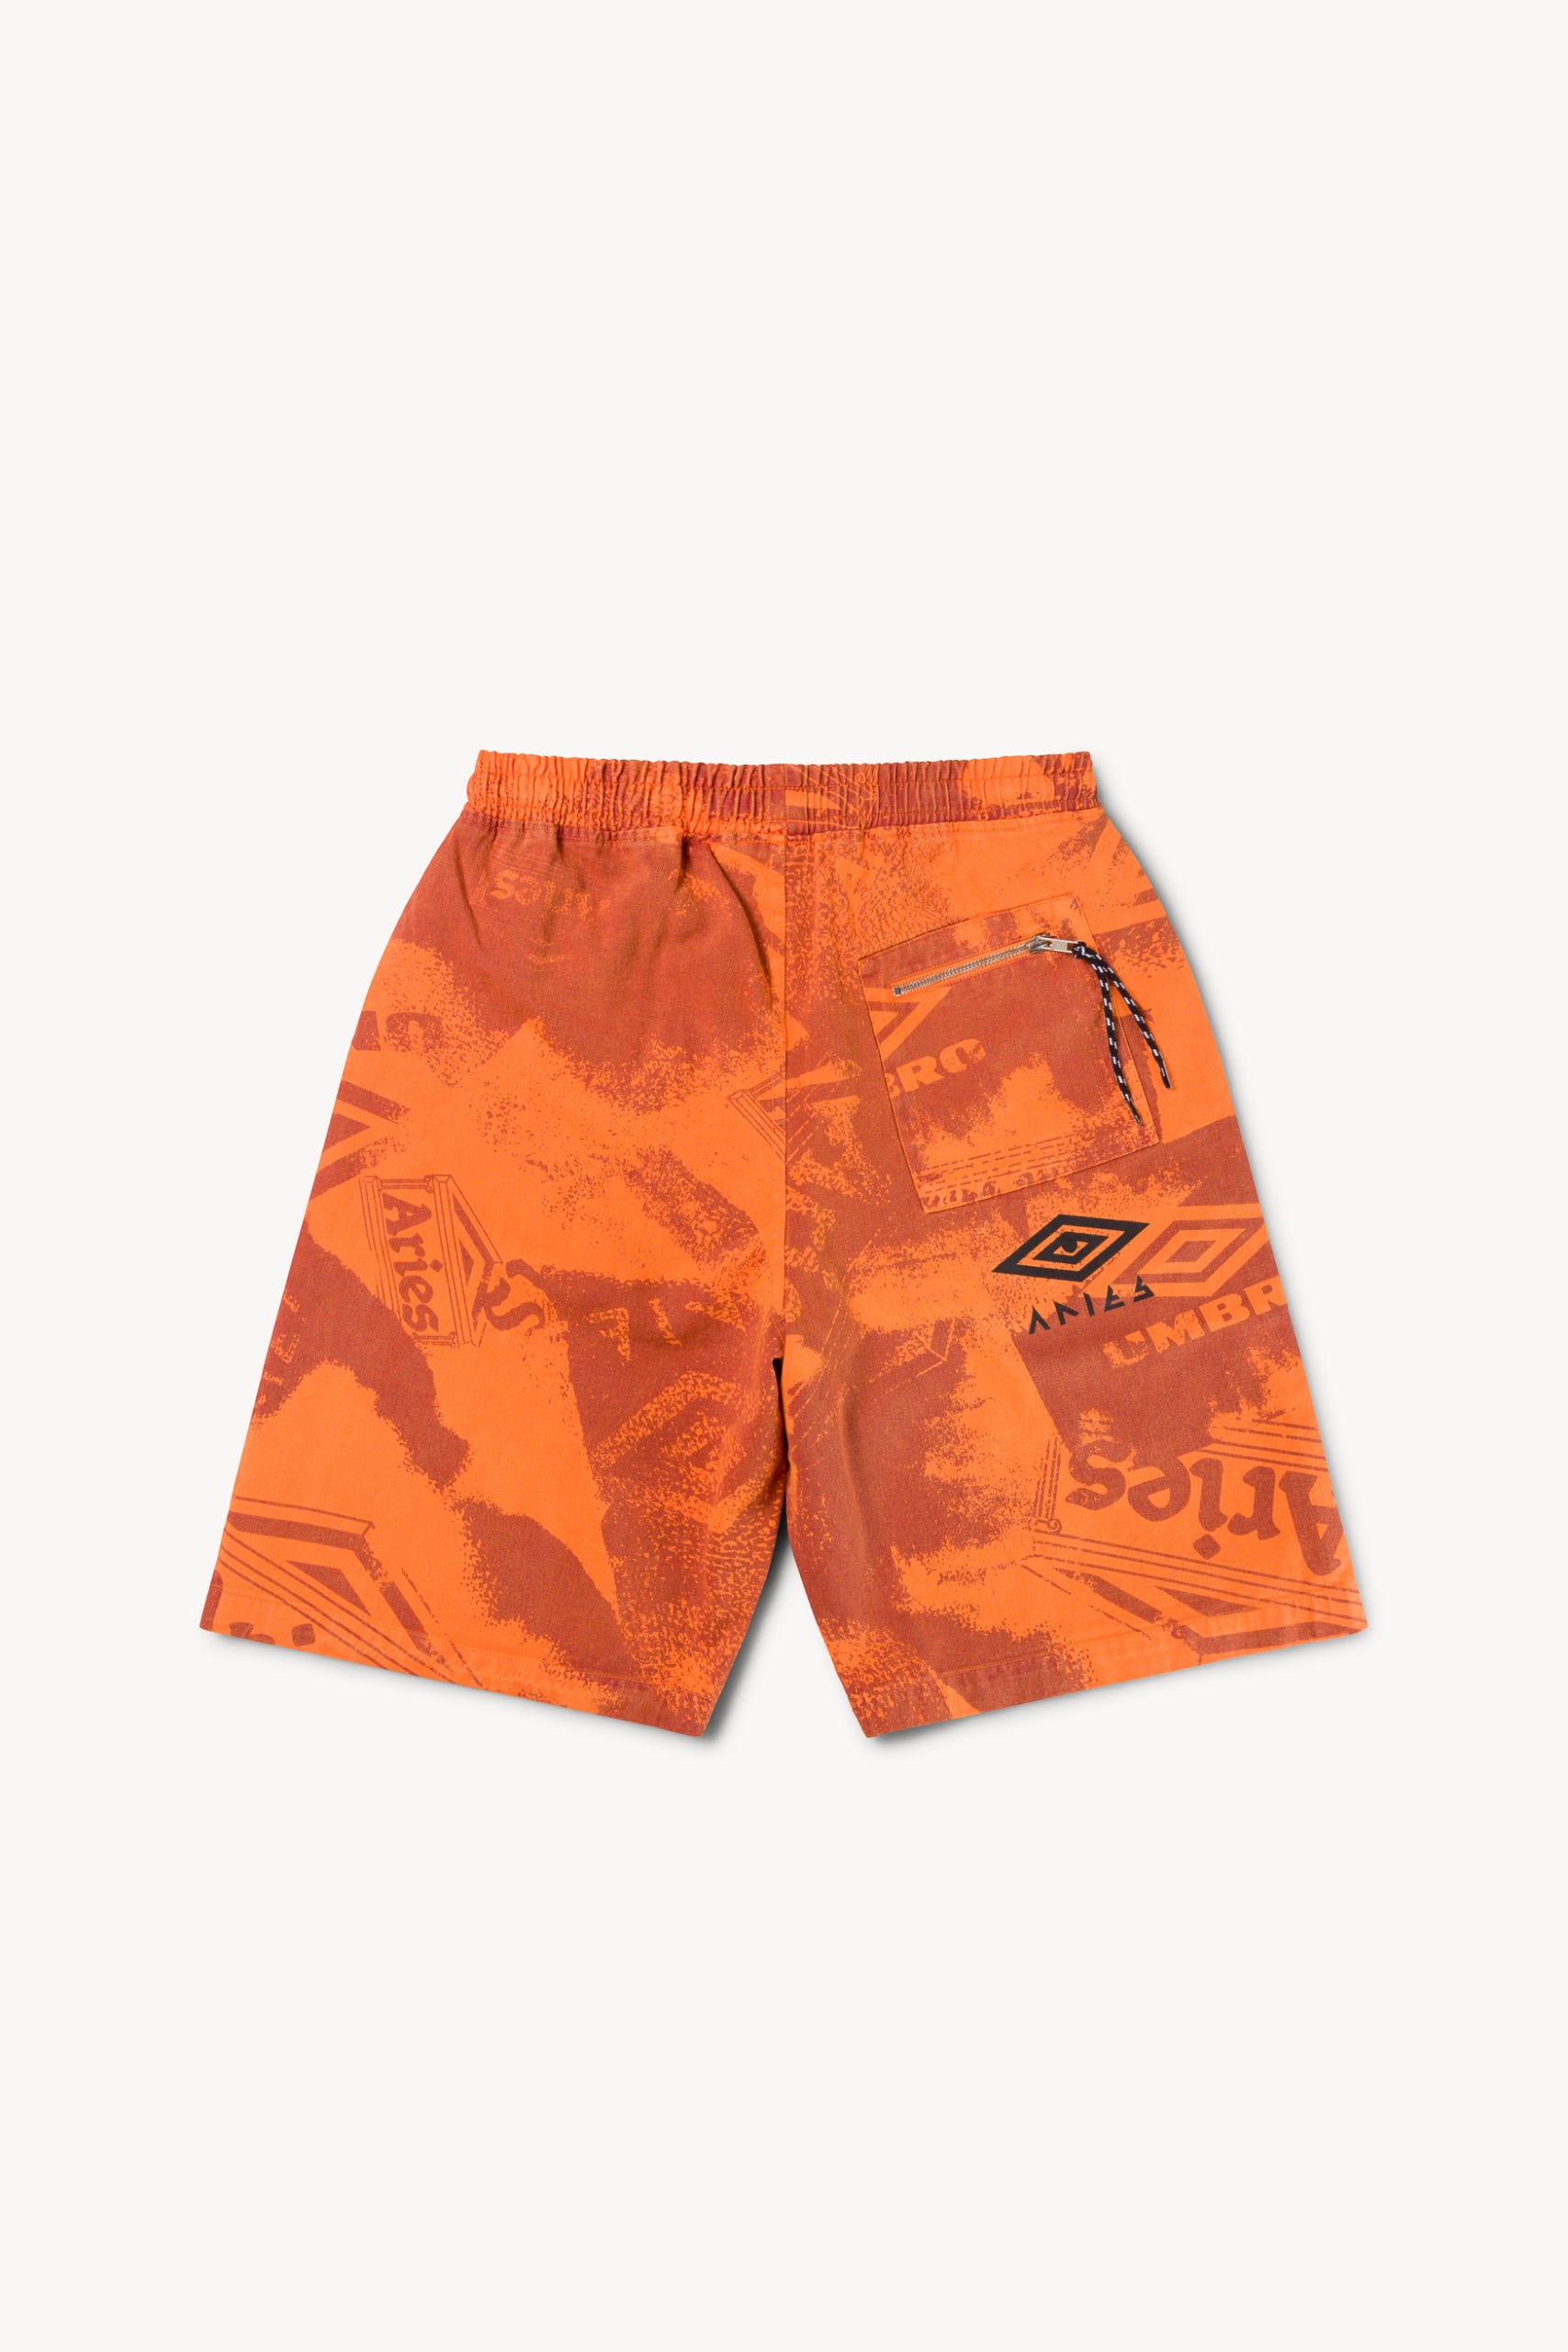 Load image into Gallery viewer, Aries x Umbro Pro 64 Shorts